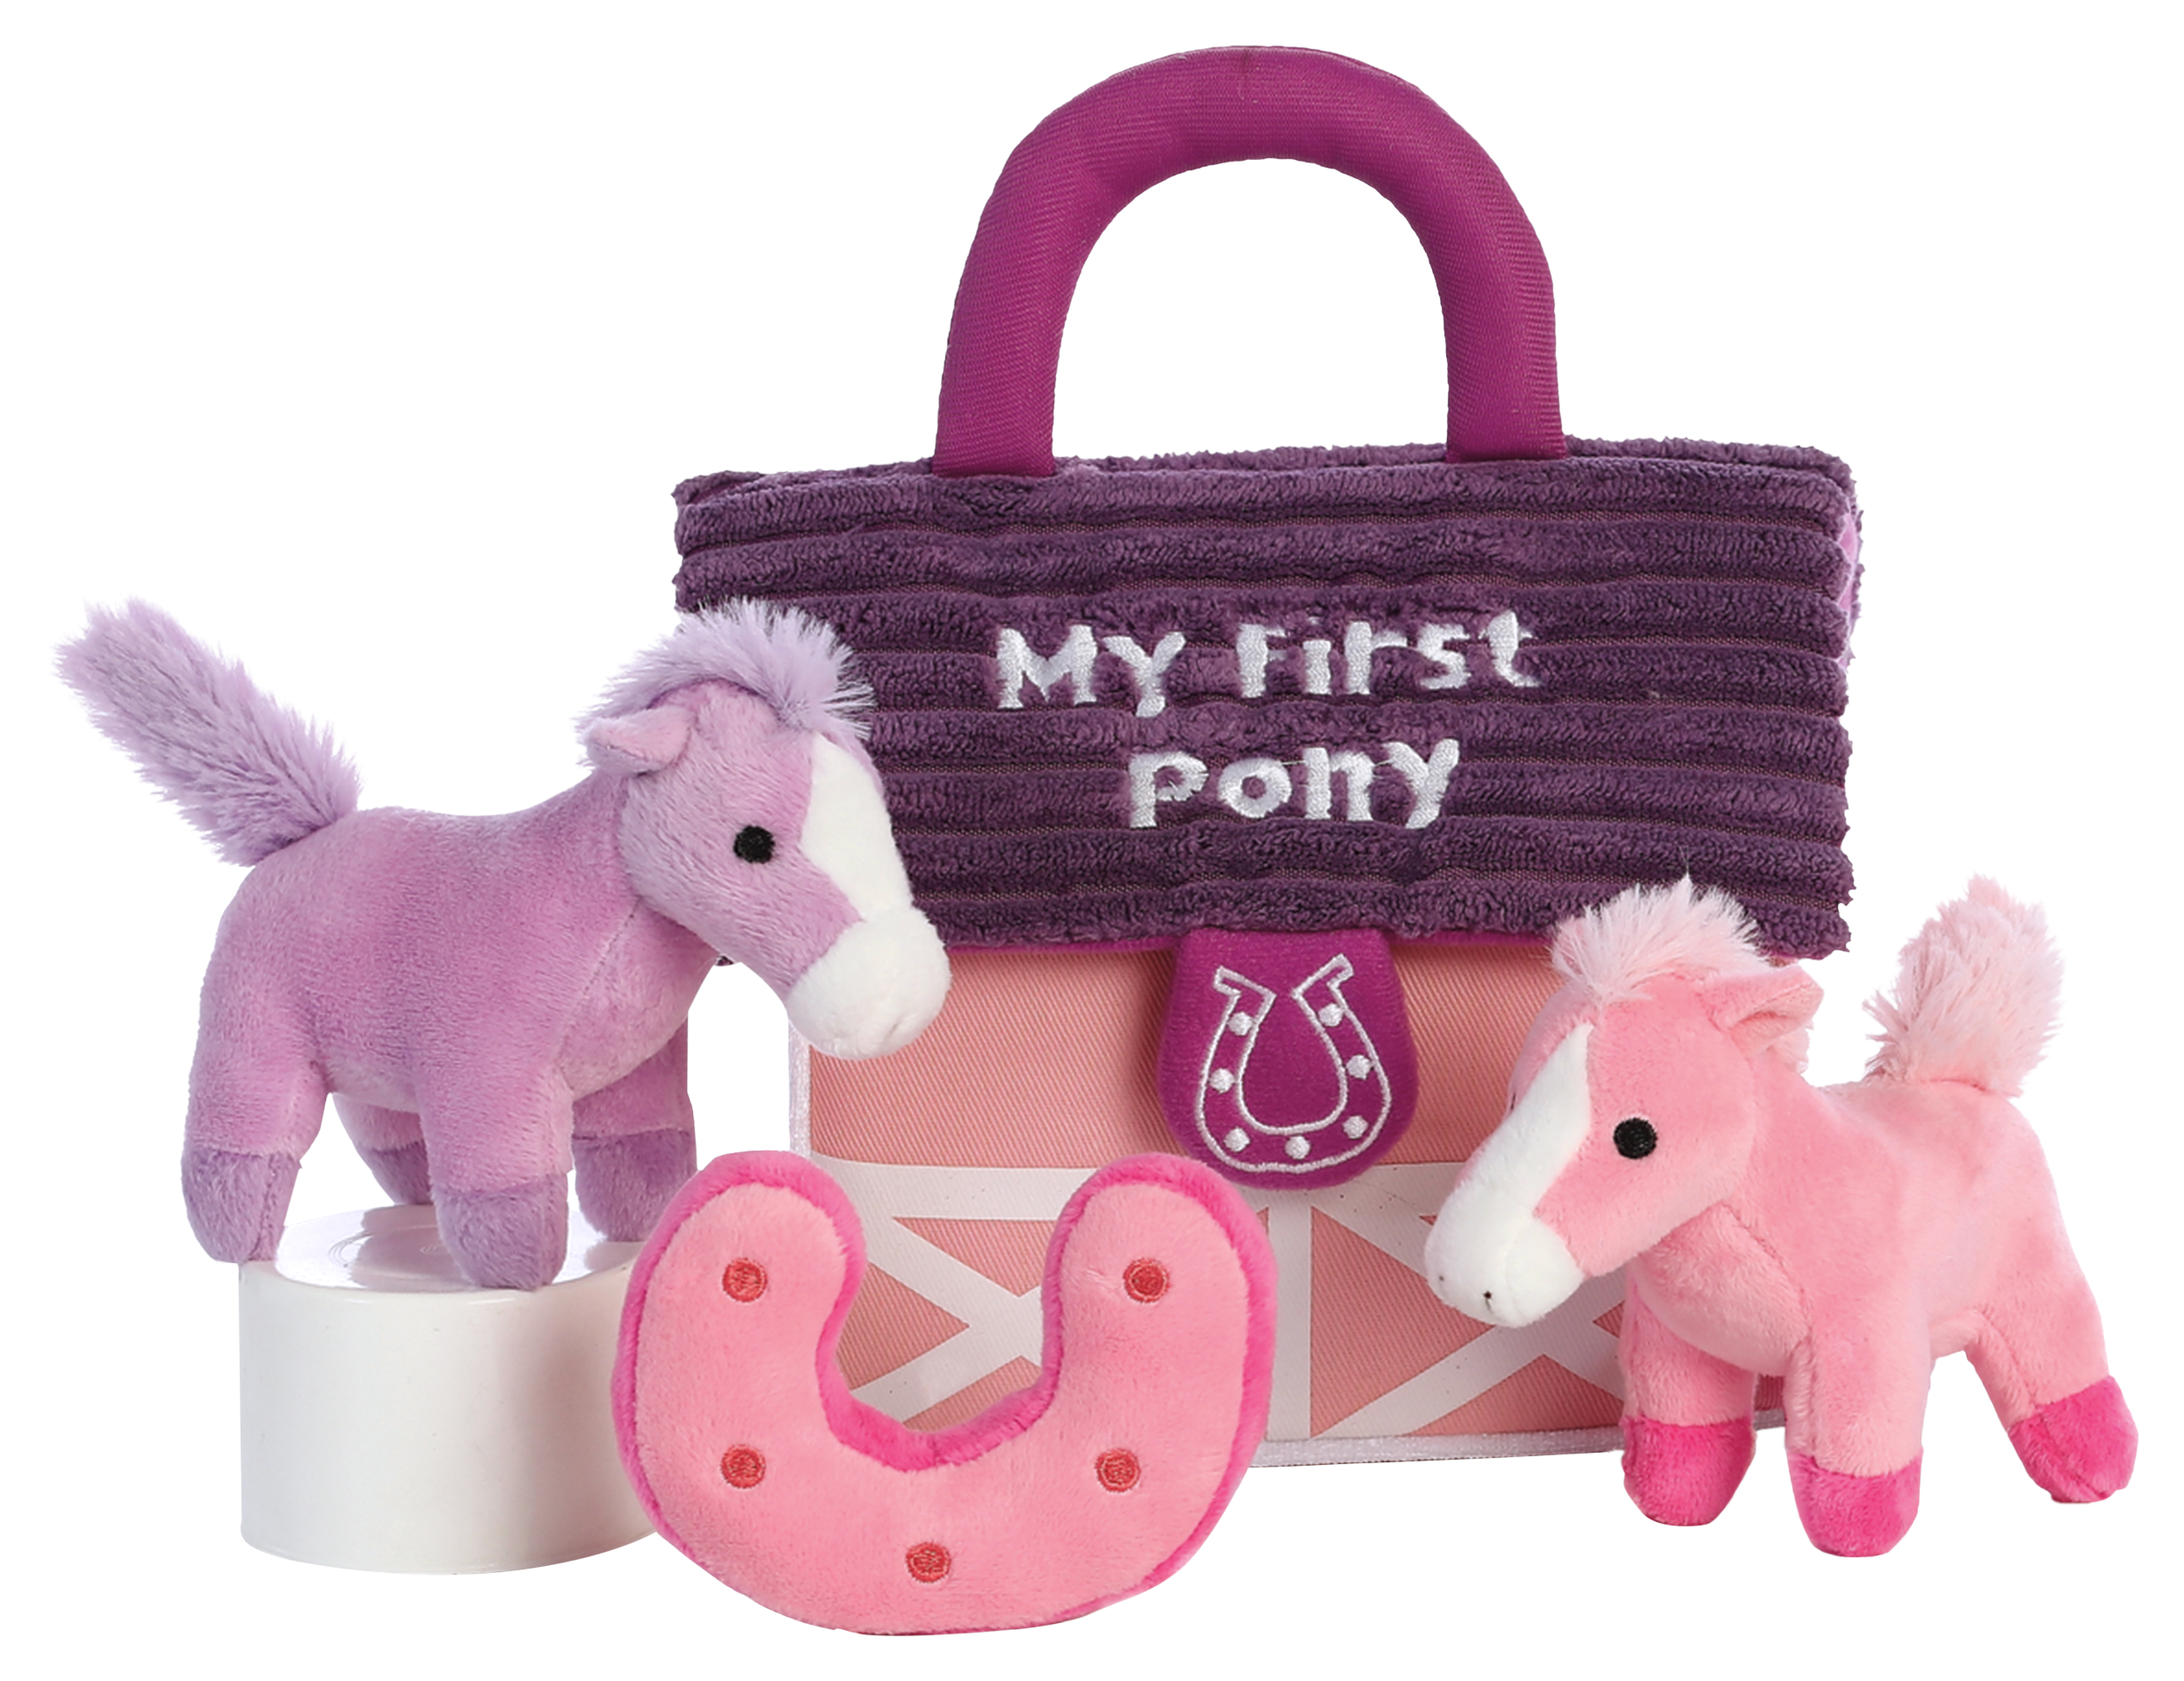 Bass Pro Shops My First Pony Baby Talk Interactive Plush Play Set